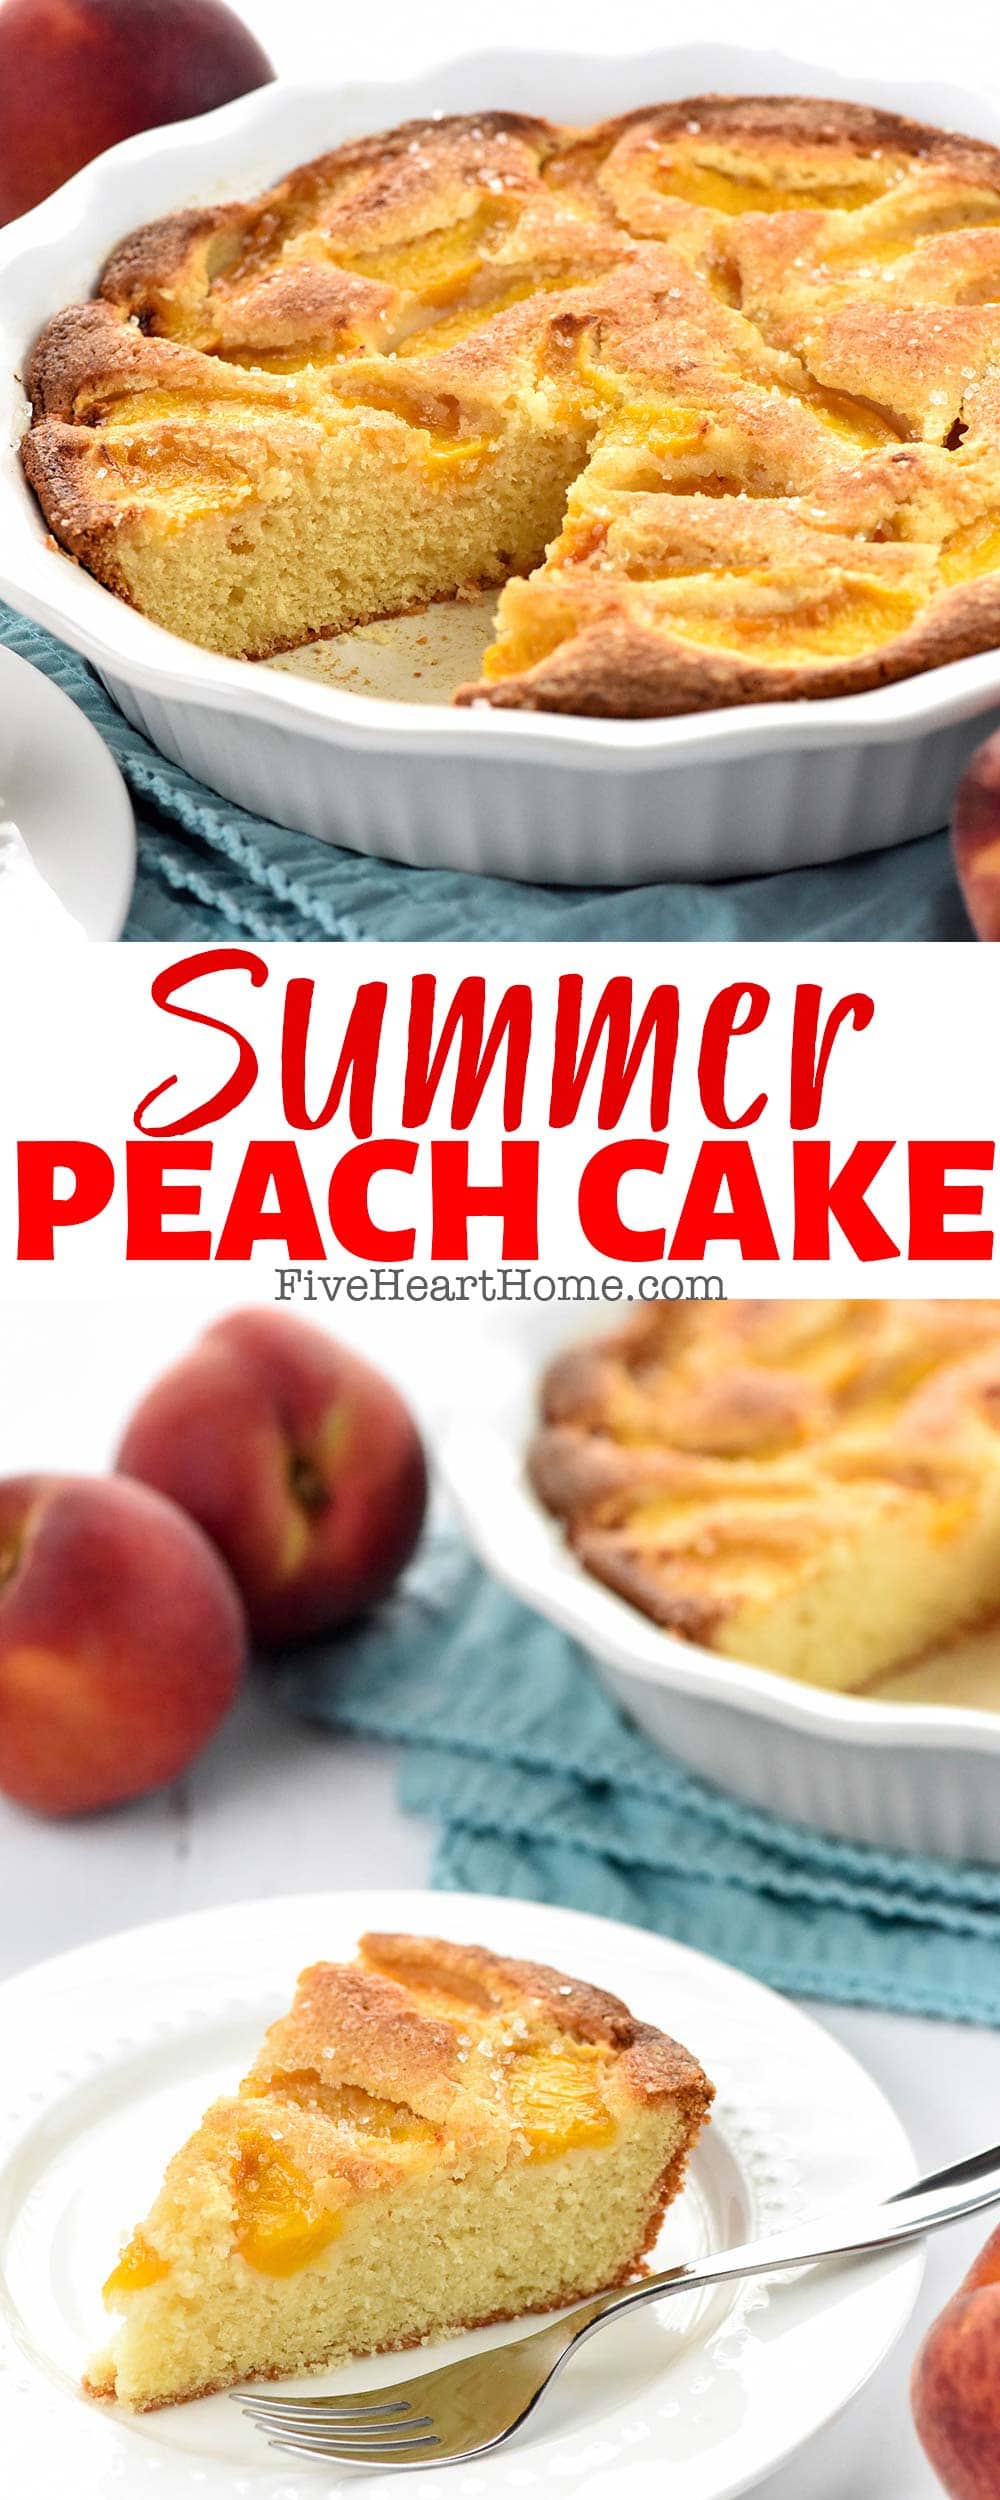 Peach Cake ~ this simple yet delectable peach cake recipe features fresh sliced peaches sunken into a sweet golden cake for the perfect summer dessert! | FiveHeartHome.com via @fivehearthome